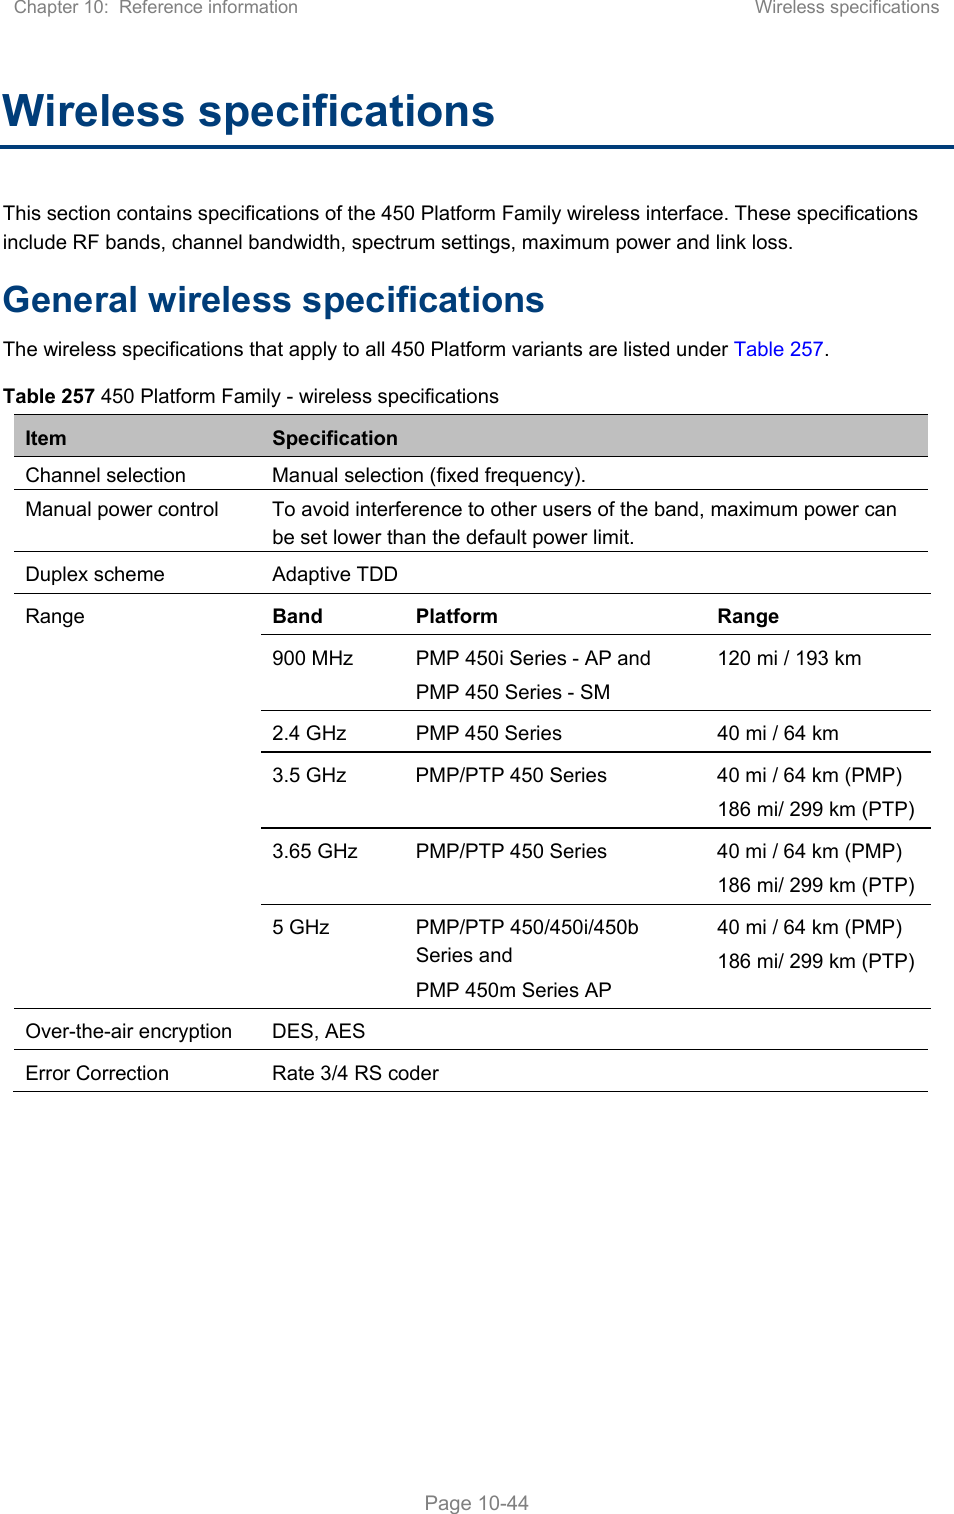 Chapter 10:  Reference information  Wireless specifications   Page 10-44 Wireless specifications This section contains specifications of the 450 Platform Family wireless interface. These specifications include RF bands, channel bandwidth, spectrum settings, maximum power and link loss. General wireless specifications The wireless specifications that apply to all 450 Platform variants are listed under Table 257. Table 257 450 Platform Family - wireless specifications Item  Specification Channel selection  Manual selection (fixed frequency). Manual power control   To avoid interference to other users of the band, maximum power can be set lower than the default power limit. Duplex scheme  Adaptive TDD Range  Band  Platform  Range 900 MHz   PMP 450i Series - AP and  PMP 450 Series - SM 120 mi / 193 km 2.4 GHz   PMP 450 Series   40 mi / 64 km 3.5 GHz   PMP/PTP 450 Series  40 mi / 64 km (PMP) 186 mi/ 299 km (PTP) 3.65 GHz   PMP/PTP 450 Series  40 mi / 64 km (PMP) 186 mi/ 299 km (PTP) 5 GHz   PMP/PTP 450/450i/450b Series and PMP 450m Series AP 40 mi / 64 km (PMP) 186 mi/ 299 km (PTP) Over-the-air encryption  DES, AES Error Correction  Rate 3/4 RS coder    